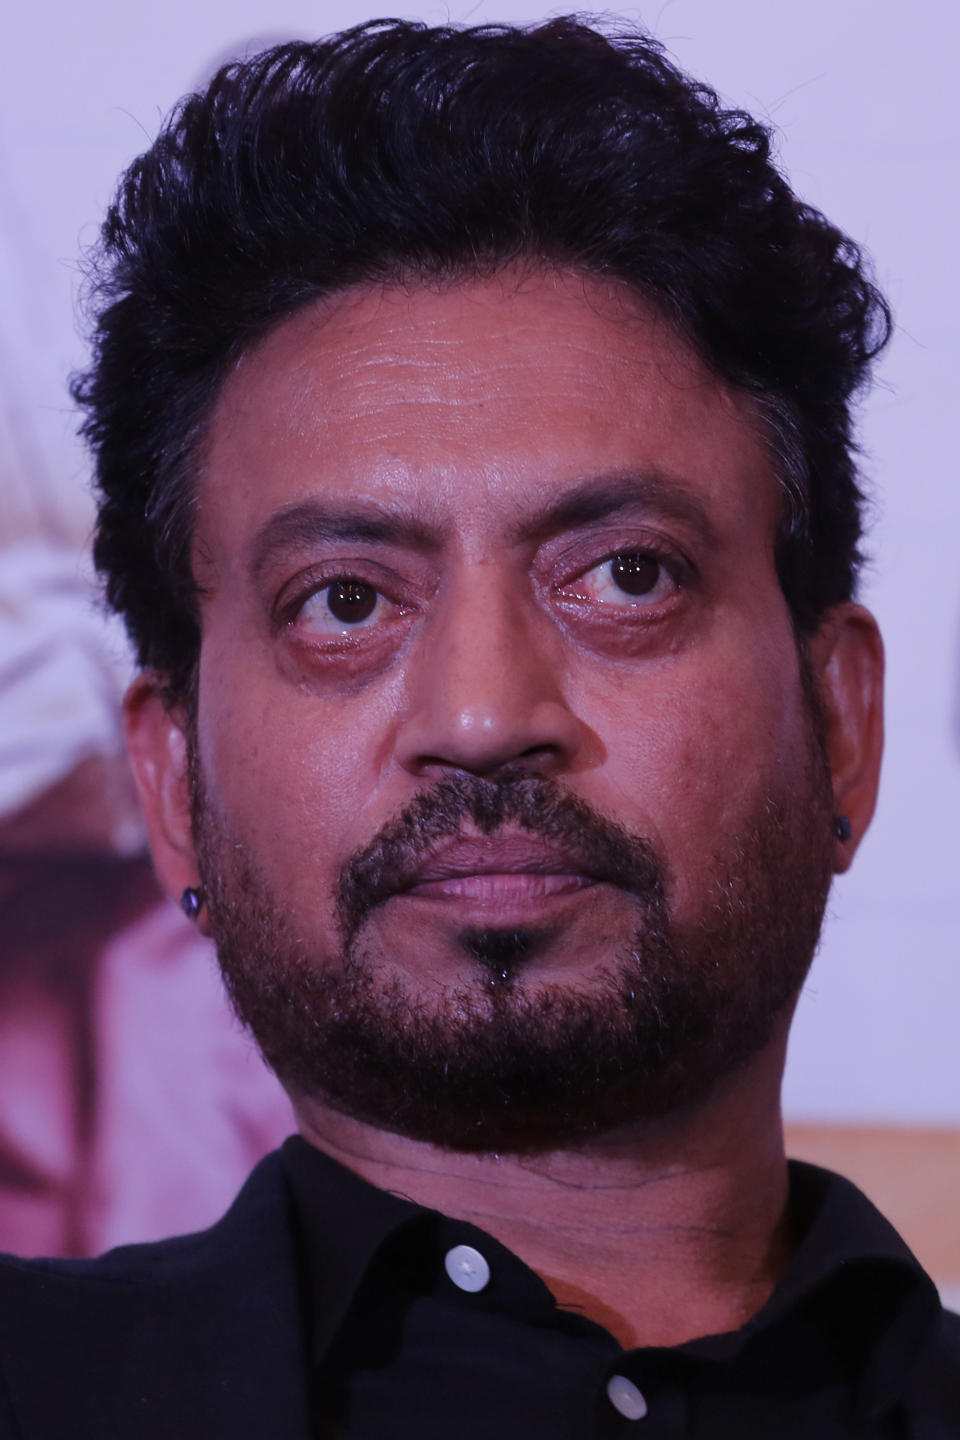 FILE- In this May 17, 2017 file photo, Bollywood actor Irrfan Khan looks on during a press conference to promote his movie "Hindi Medium" in Ahmadabad, India. Khan, a veteran character actor in Bollywood movies and one of India's most well-known exports to Hollywood, has died. He was 54. (AP Photo/Ajit Solanki, File)